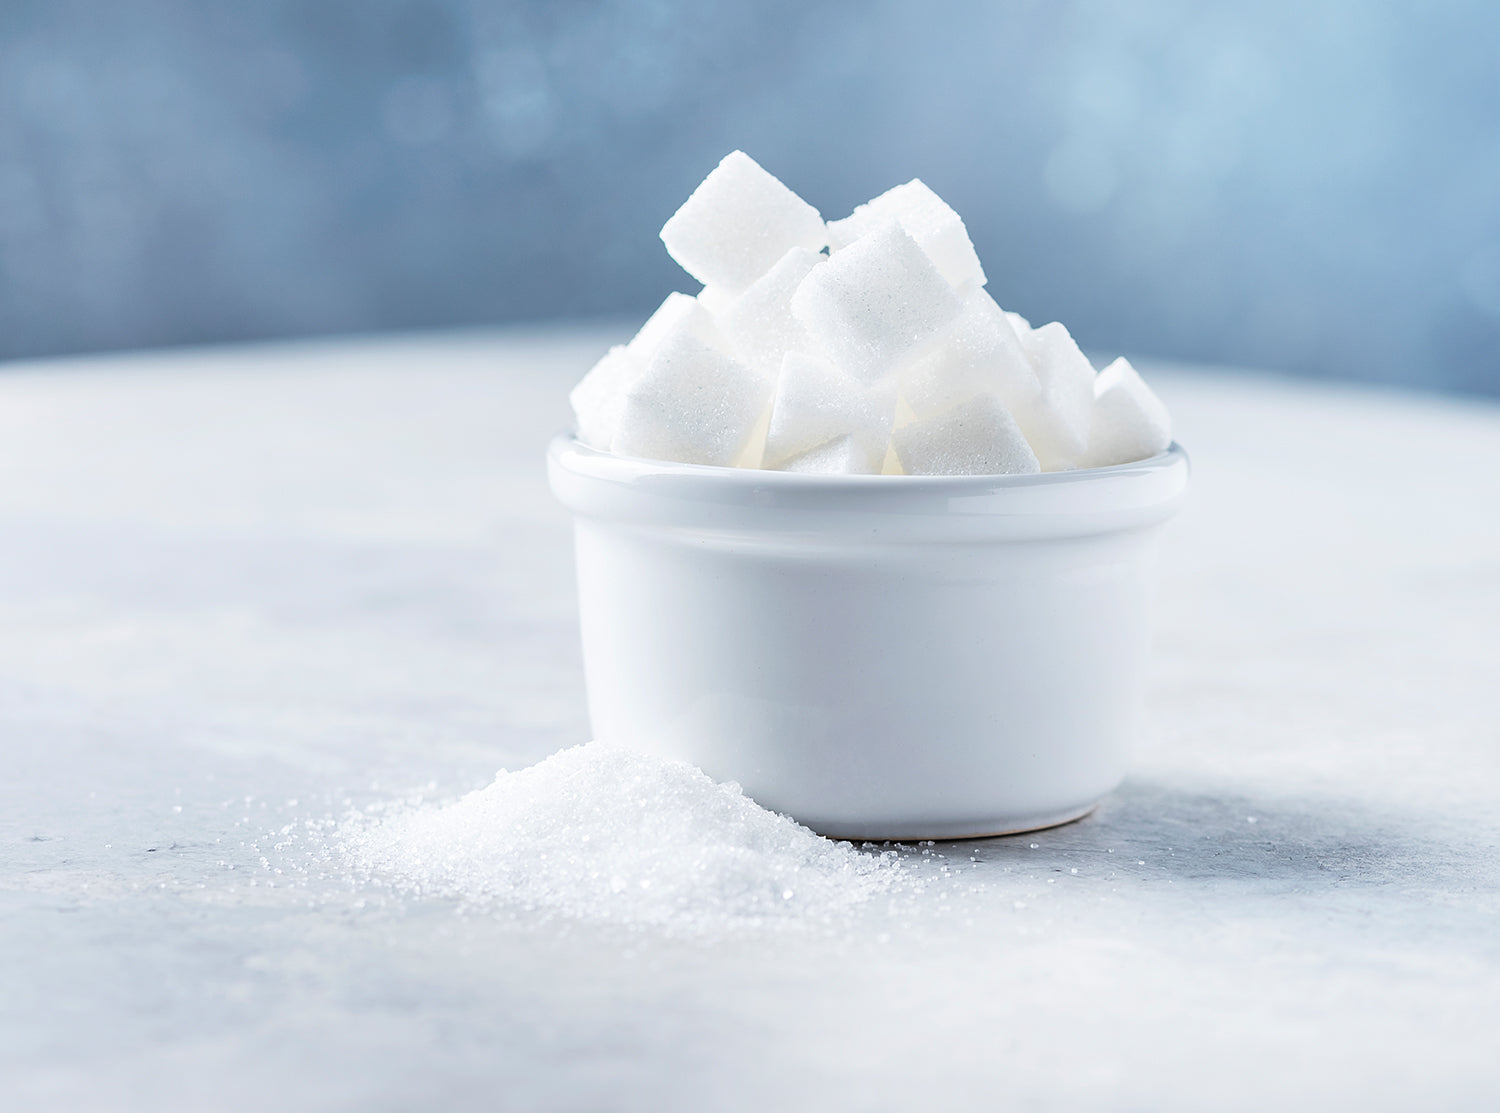 The negative effects of sugar on your health